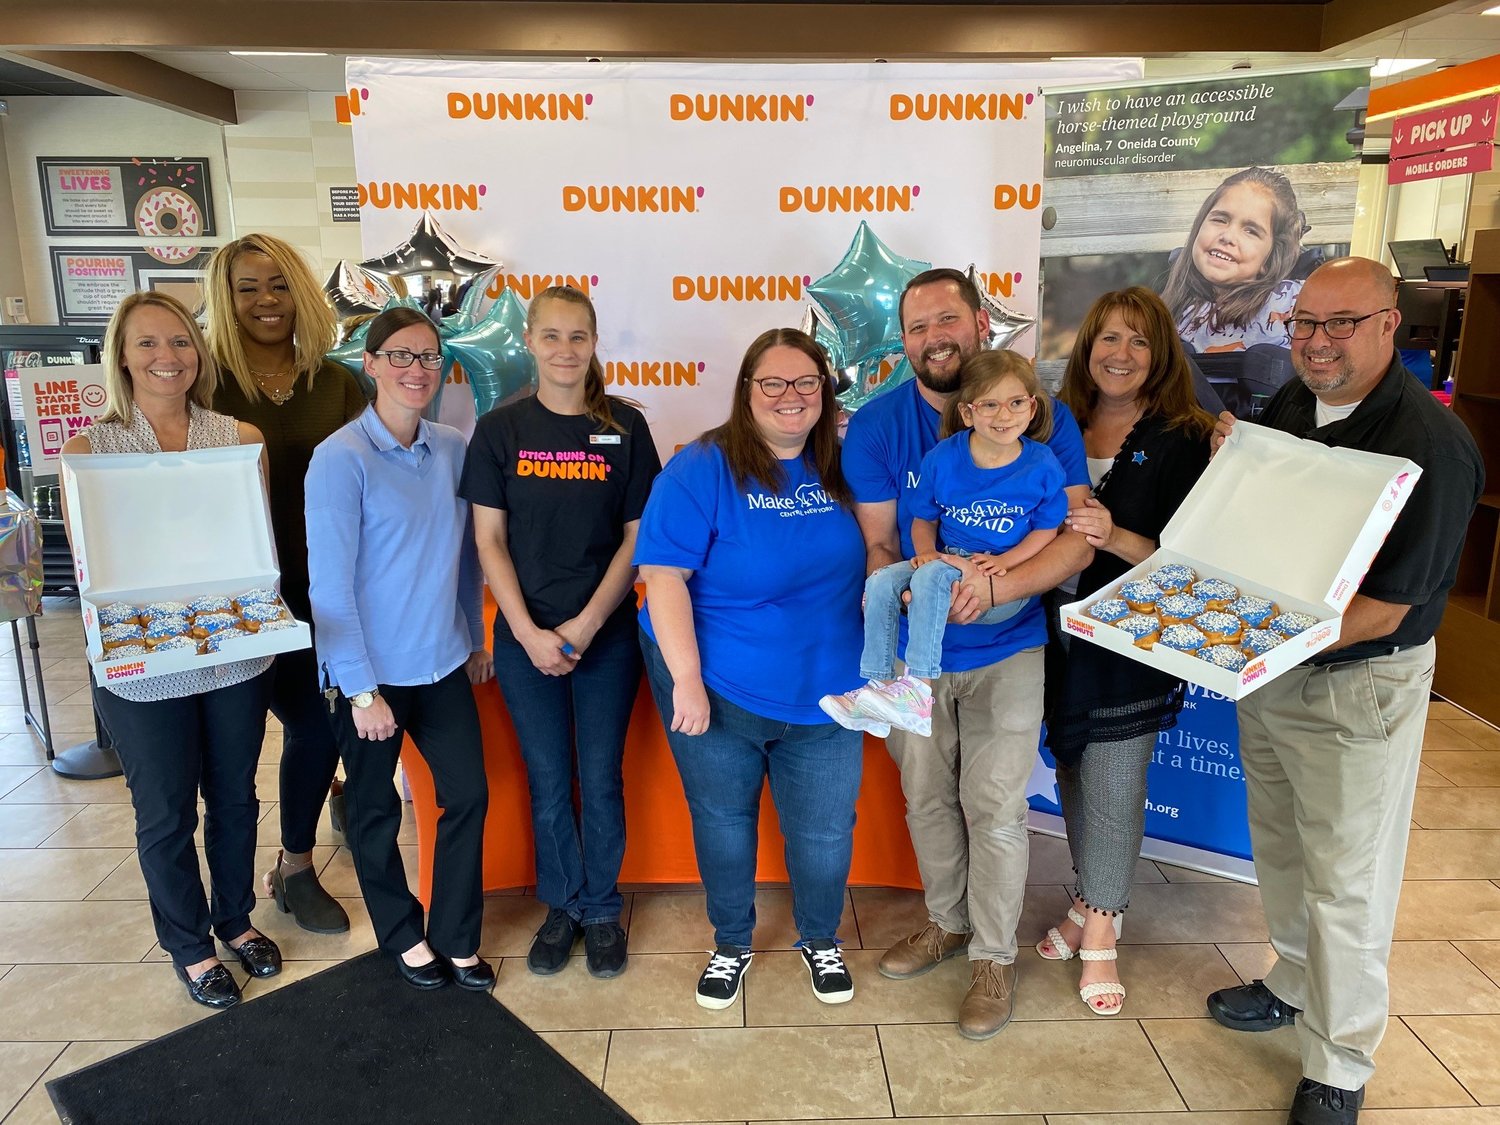 Representatives from Dunkin’ and Make-A-Wish Central New York celebrate the 10th anniversary of the Make-A-Wish Star Donut campaign on Thursday, Sept. 1 at the Dunkin’ restaurant at 112 North Genesee St. in Utica. Guests who donate $1 to Make-A-Wish at participating Dunkin’ restaurants in the Mohawk Valley through Sept. 12 will receive a specially-crafted Make-A-Wish Star Donut. The Star Donut campaign has raised nearly $650,000 for Make-A-Wish chapters throughout upstate New York since 2013.